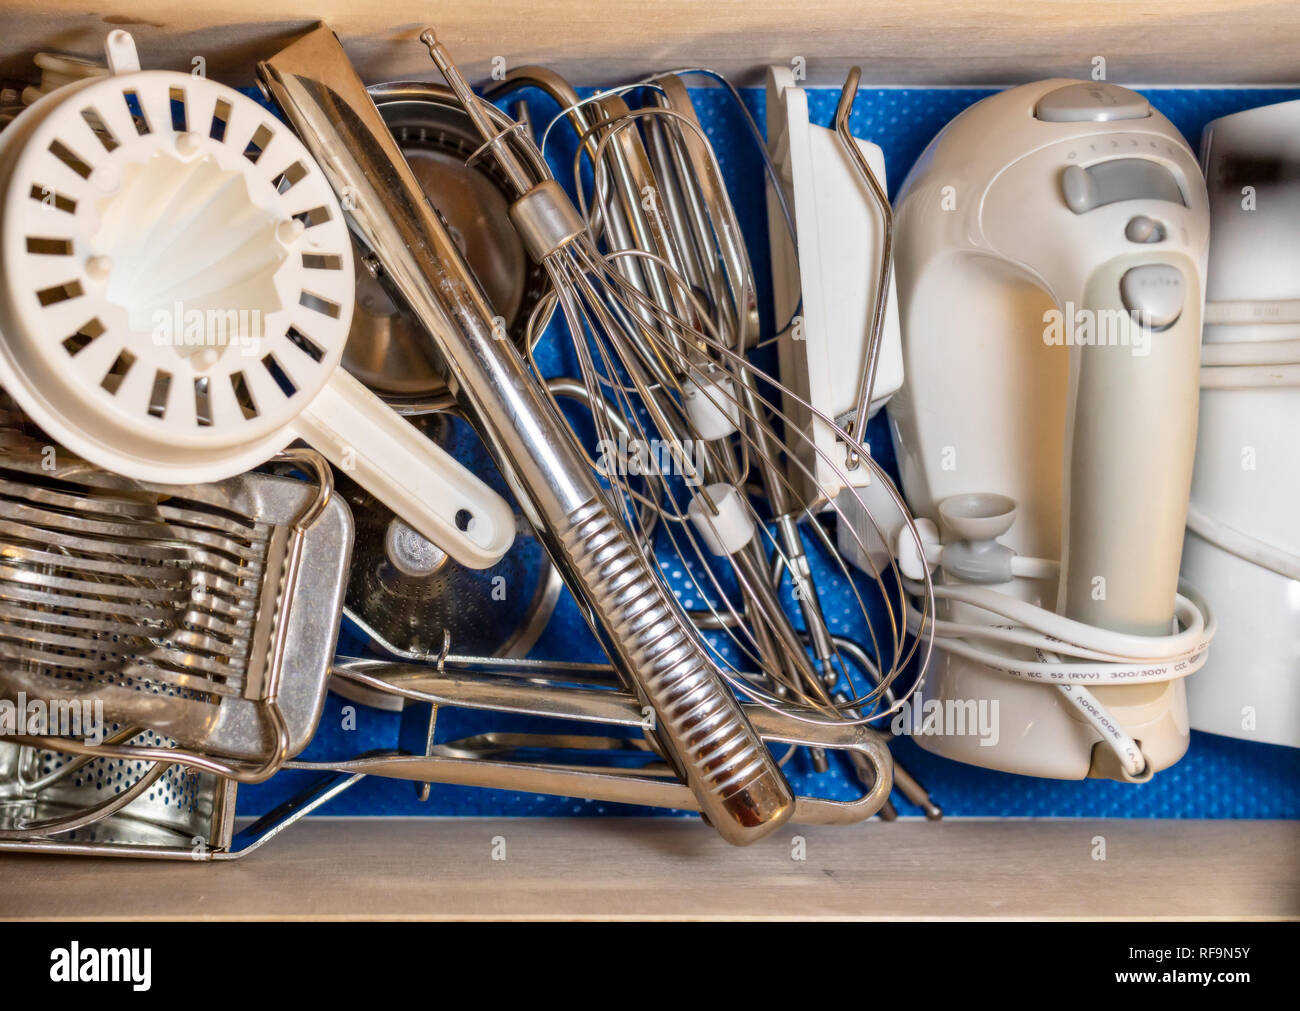 various kitchen utensils in a real life home Stock Photo